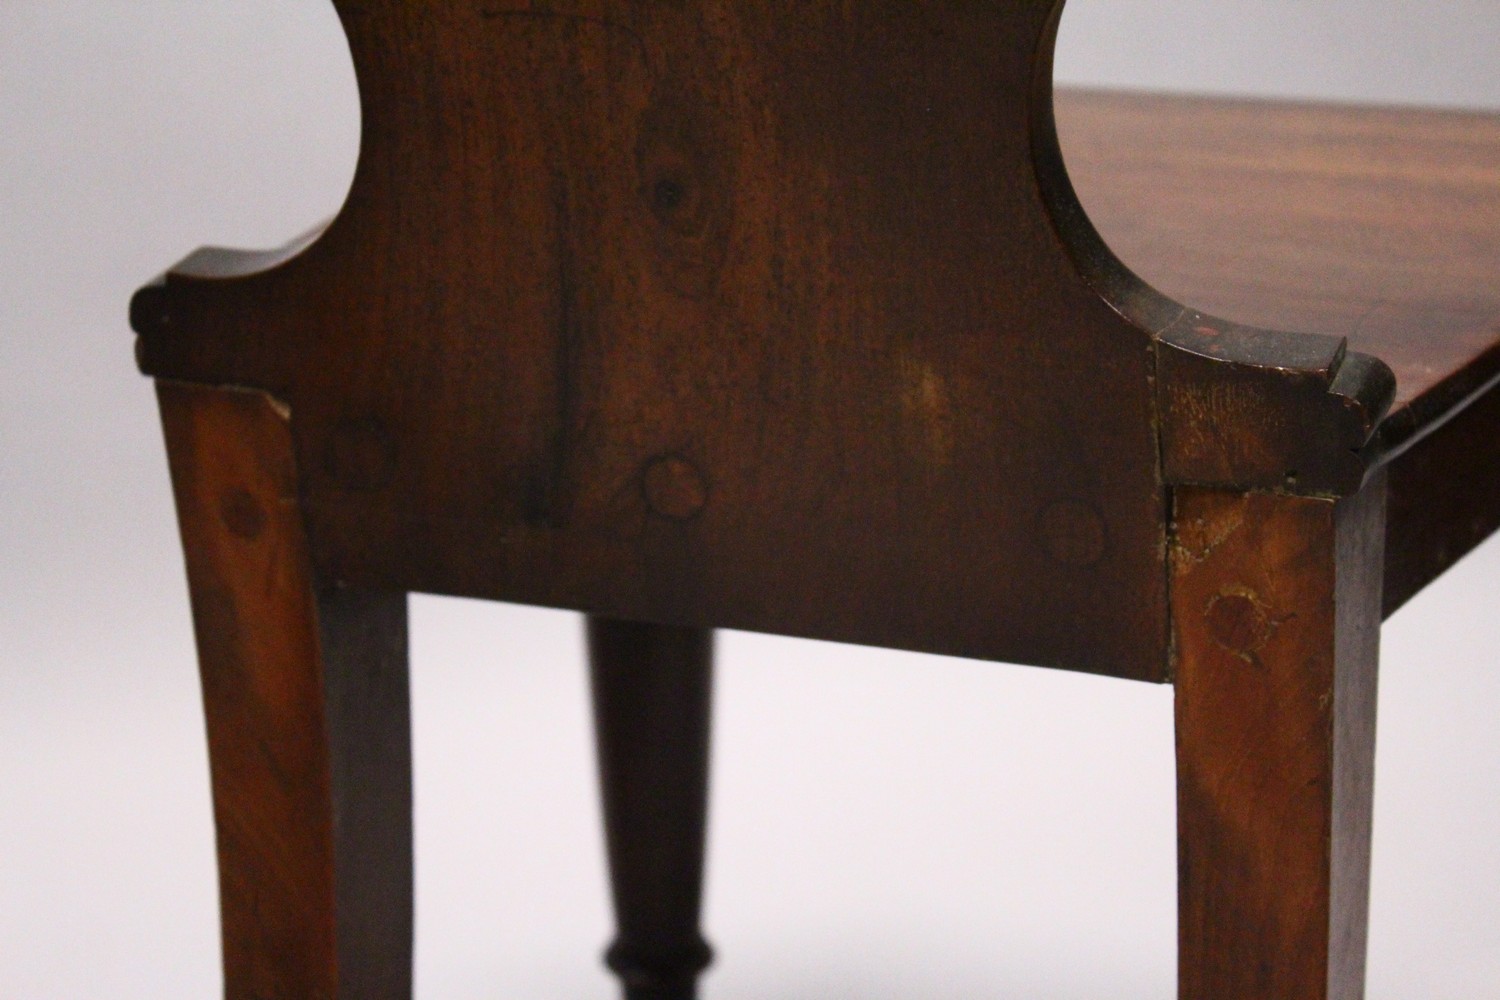 A GOOD PAIR OF REGENCY MAHOGANY HALL CHAIRS, the circular backs with painted crests, solid seats - Image 5 of 5